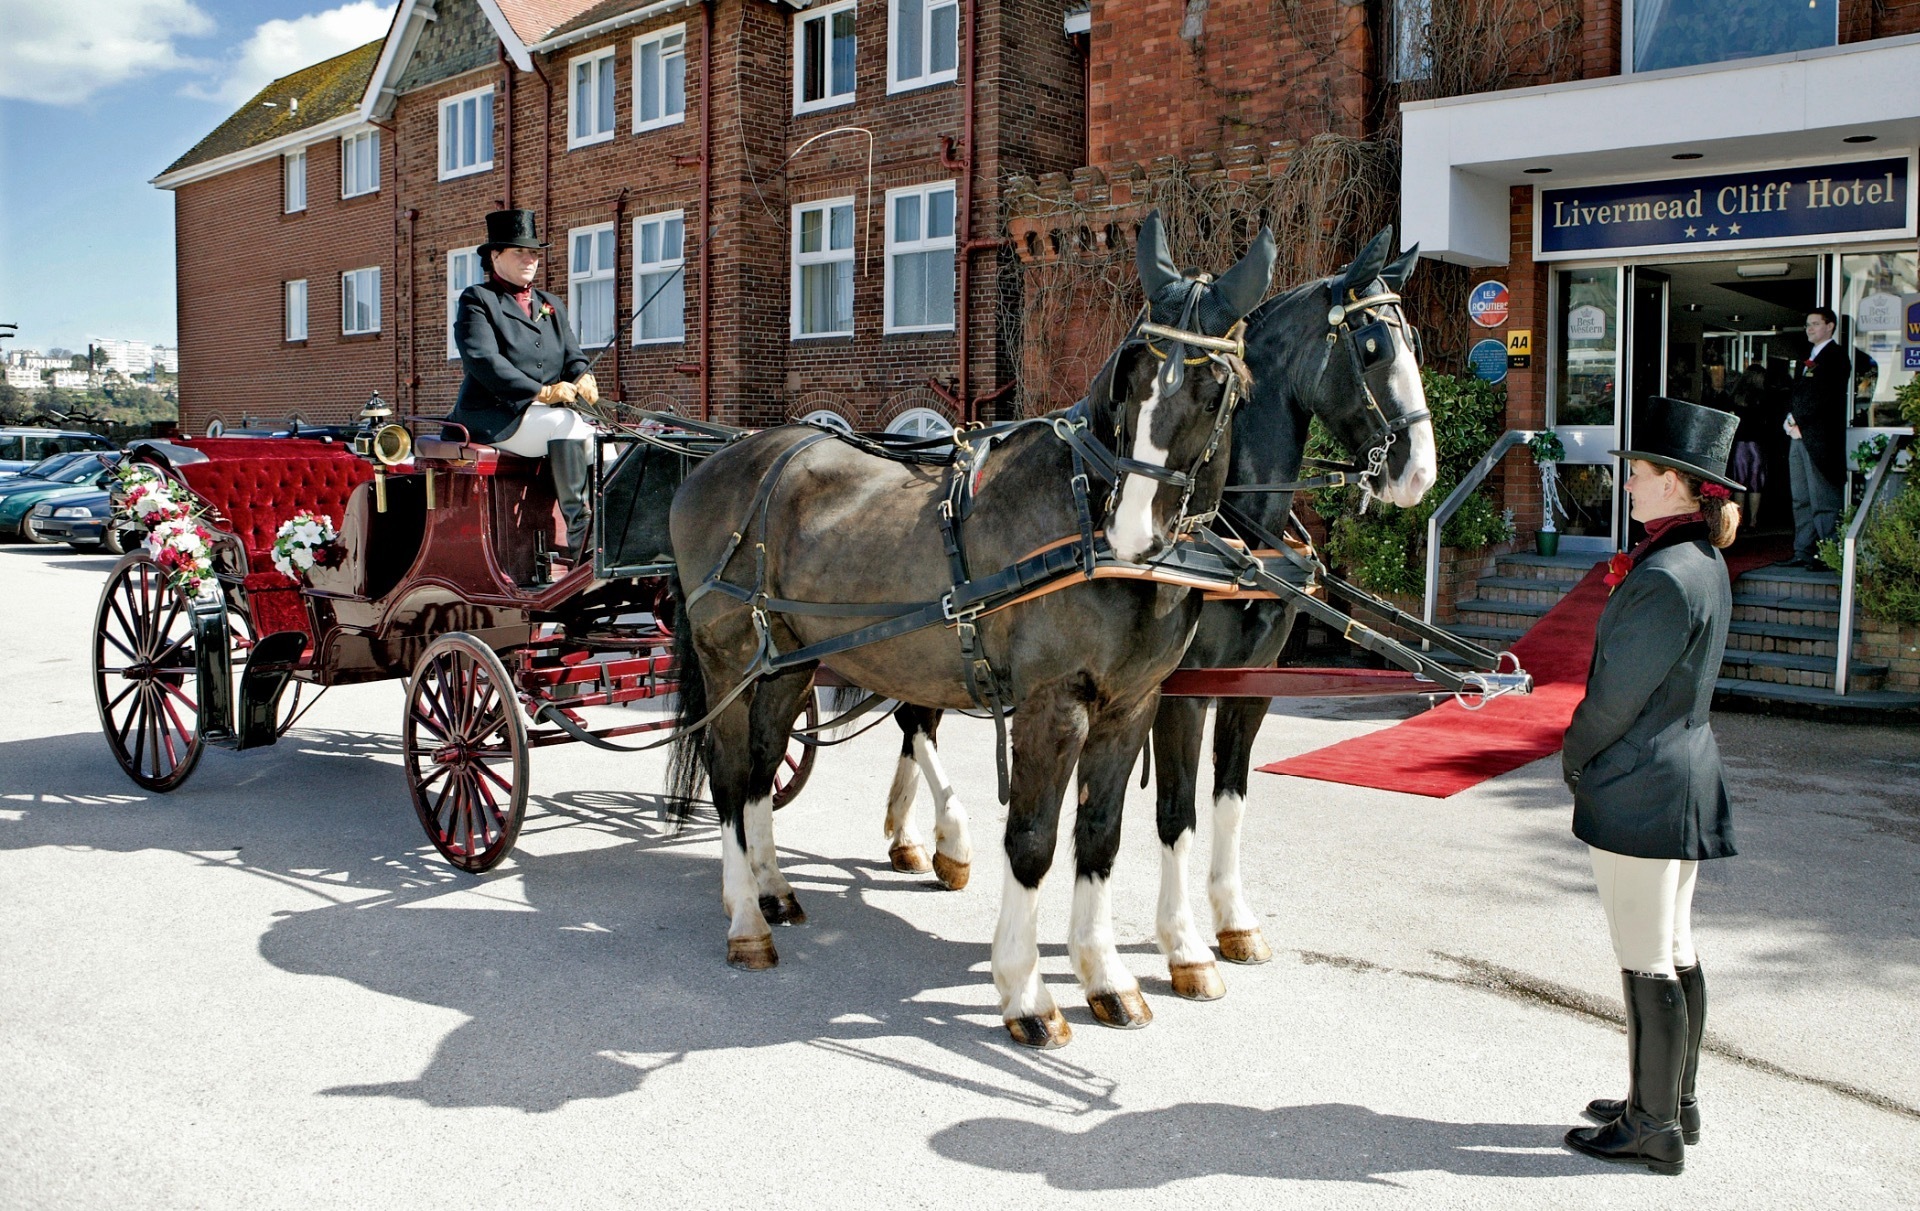 A coach and horses for the wedding party outside of the Livermead Cliff Hotel in Torquay